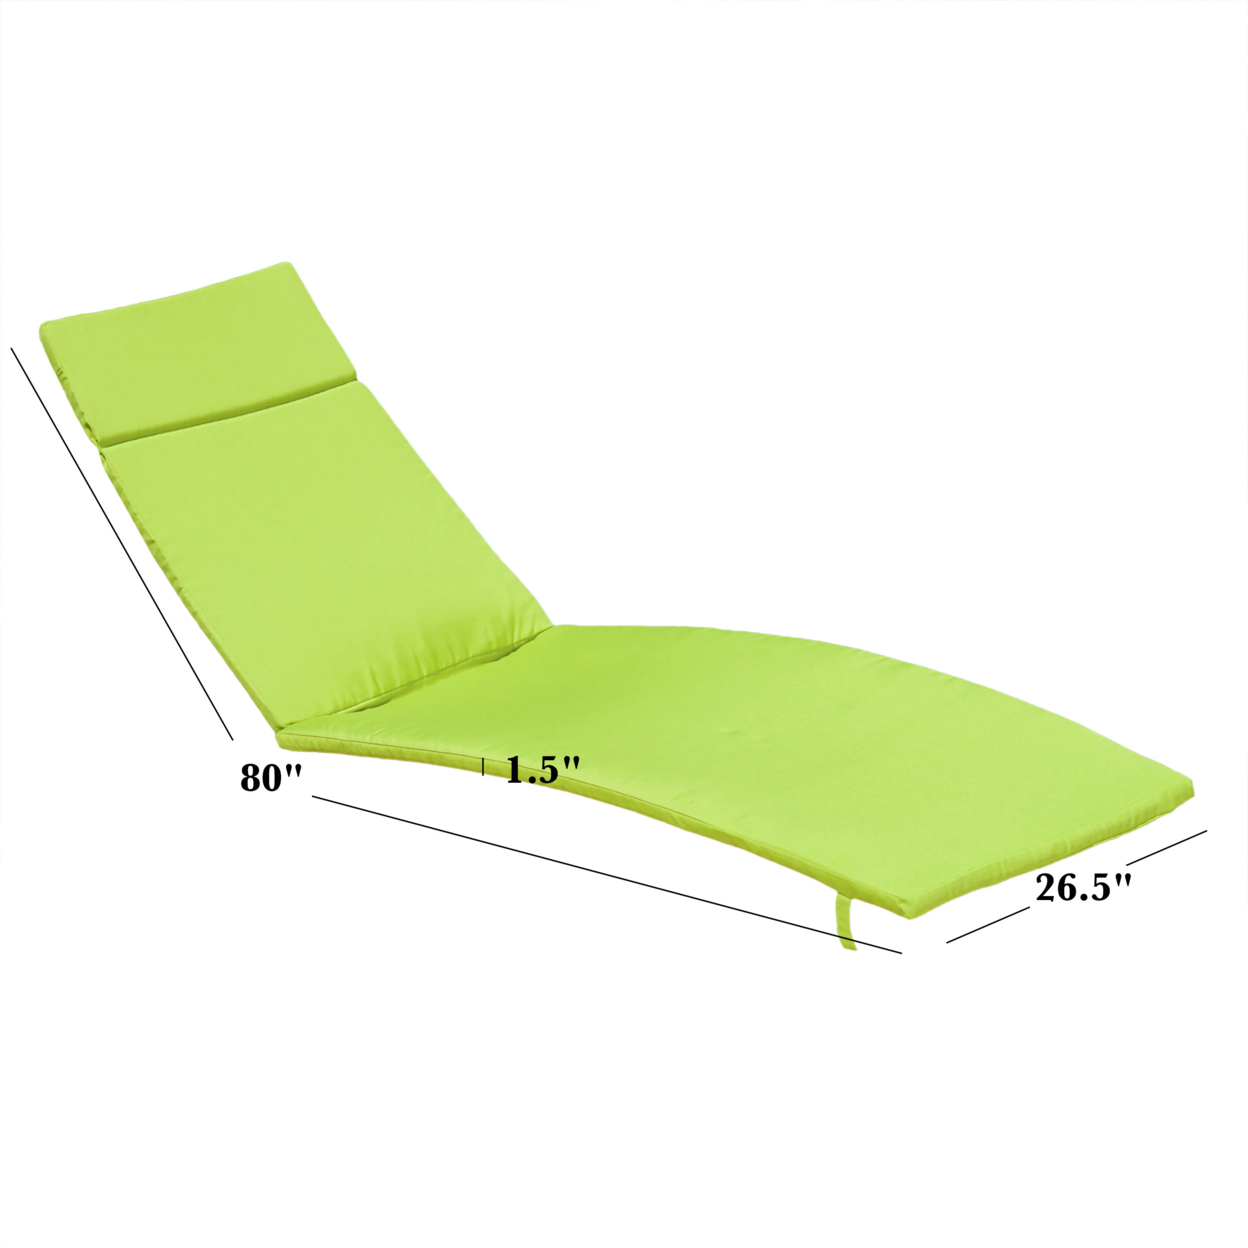 Set Of 2 Green Cushion Pads For Outdoor Chaise Lounge Chairs